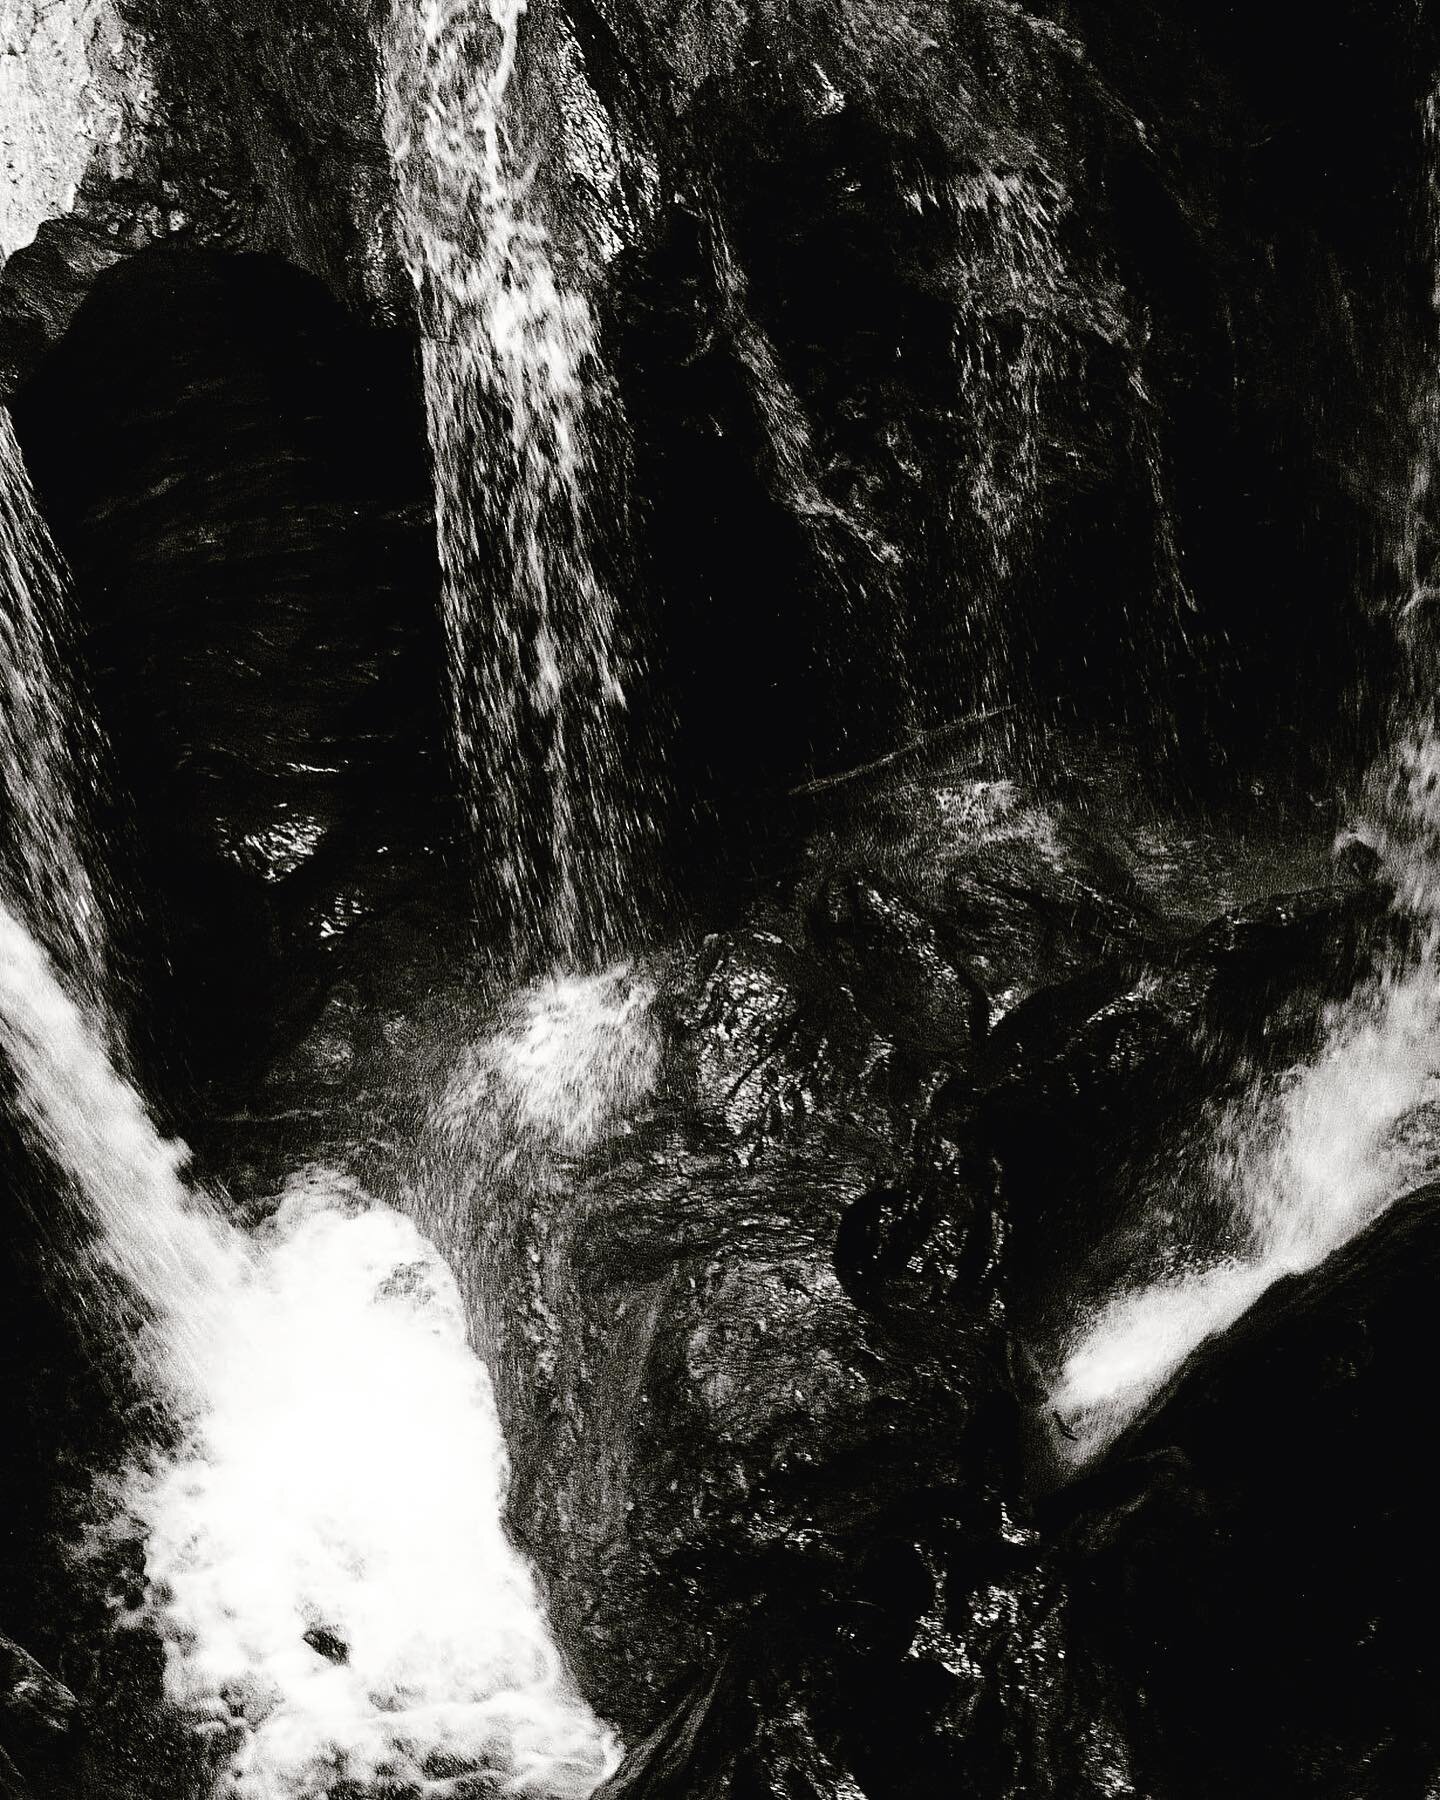 Fear exists within our blood. The scent of dried dead meat upon its release. Expel that fear in the form of water. An Iron throne carrying its path. 

+
#blackandwhite #waterfall #blackandwhitephotography #stone #water #rebirth